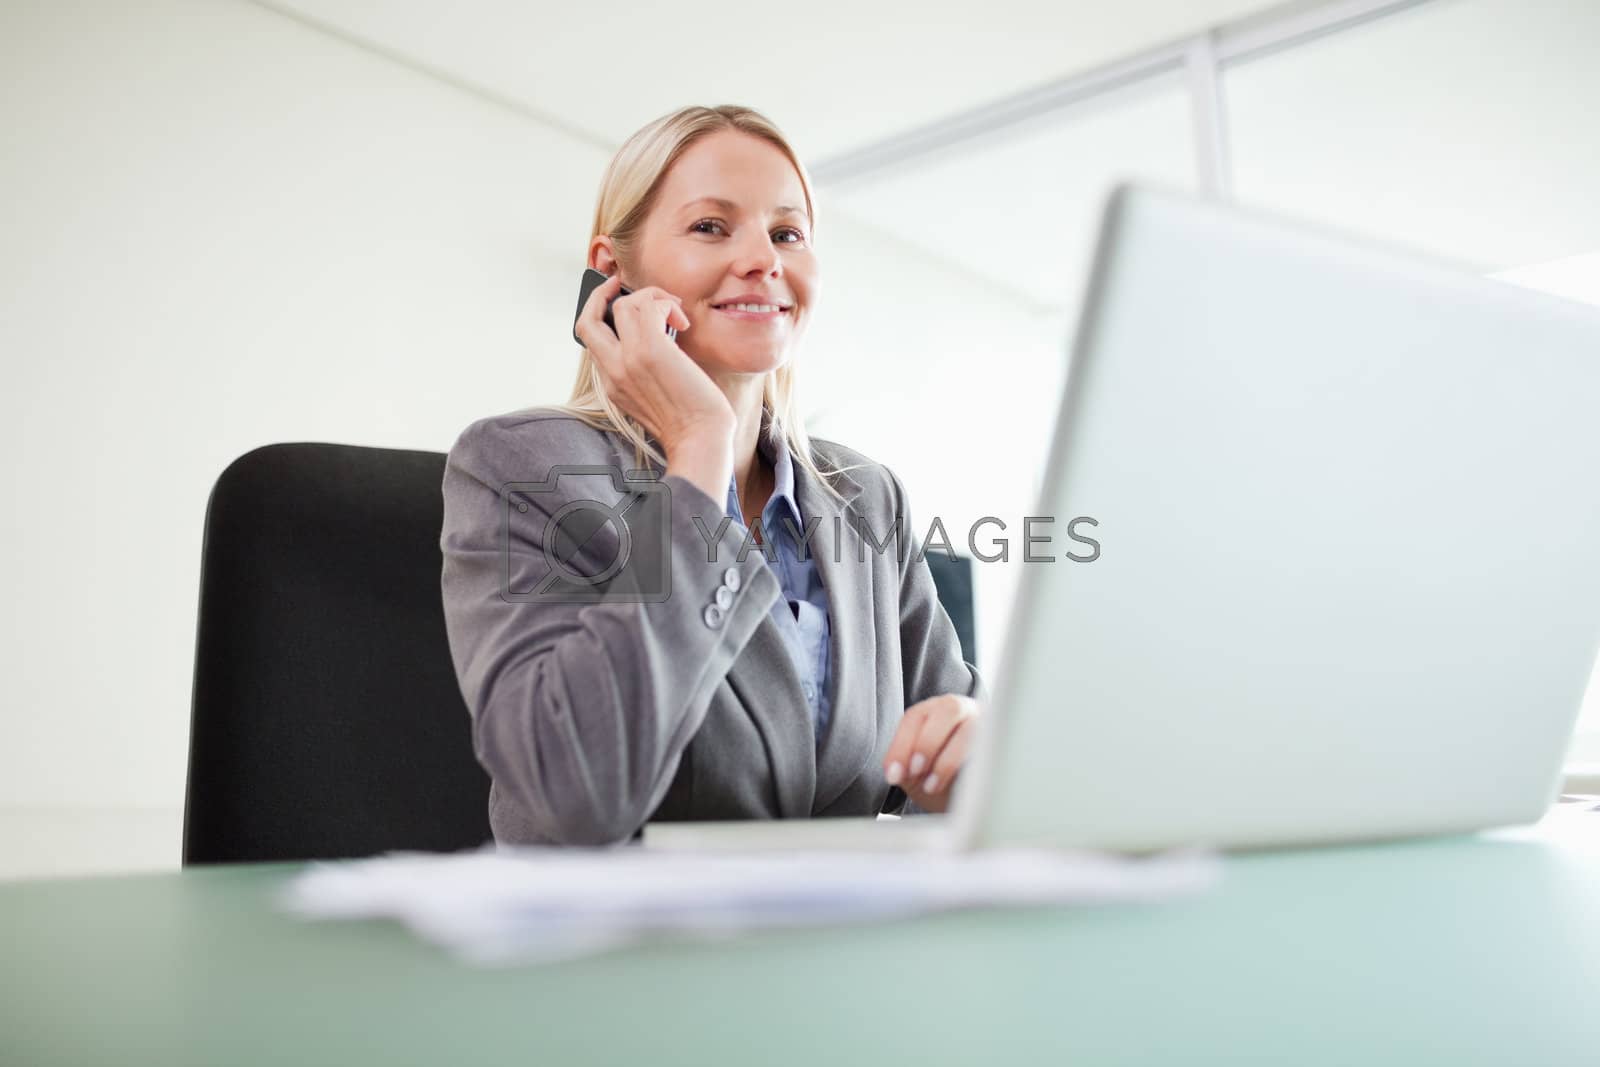 Royalty free image of Smiling businesswoman on the phone by Wavebreakmedia